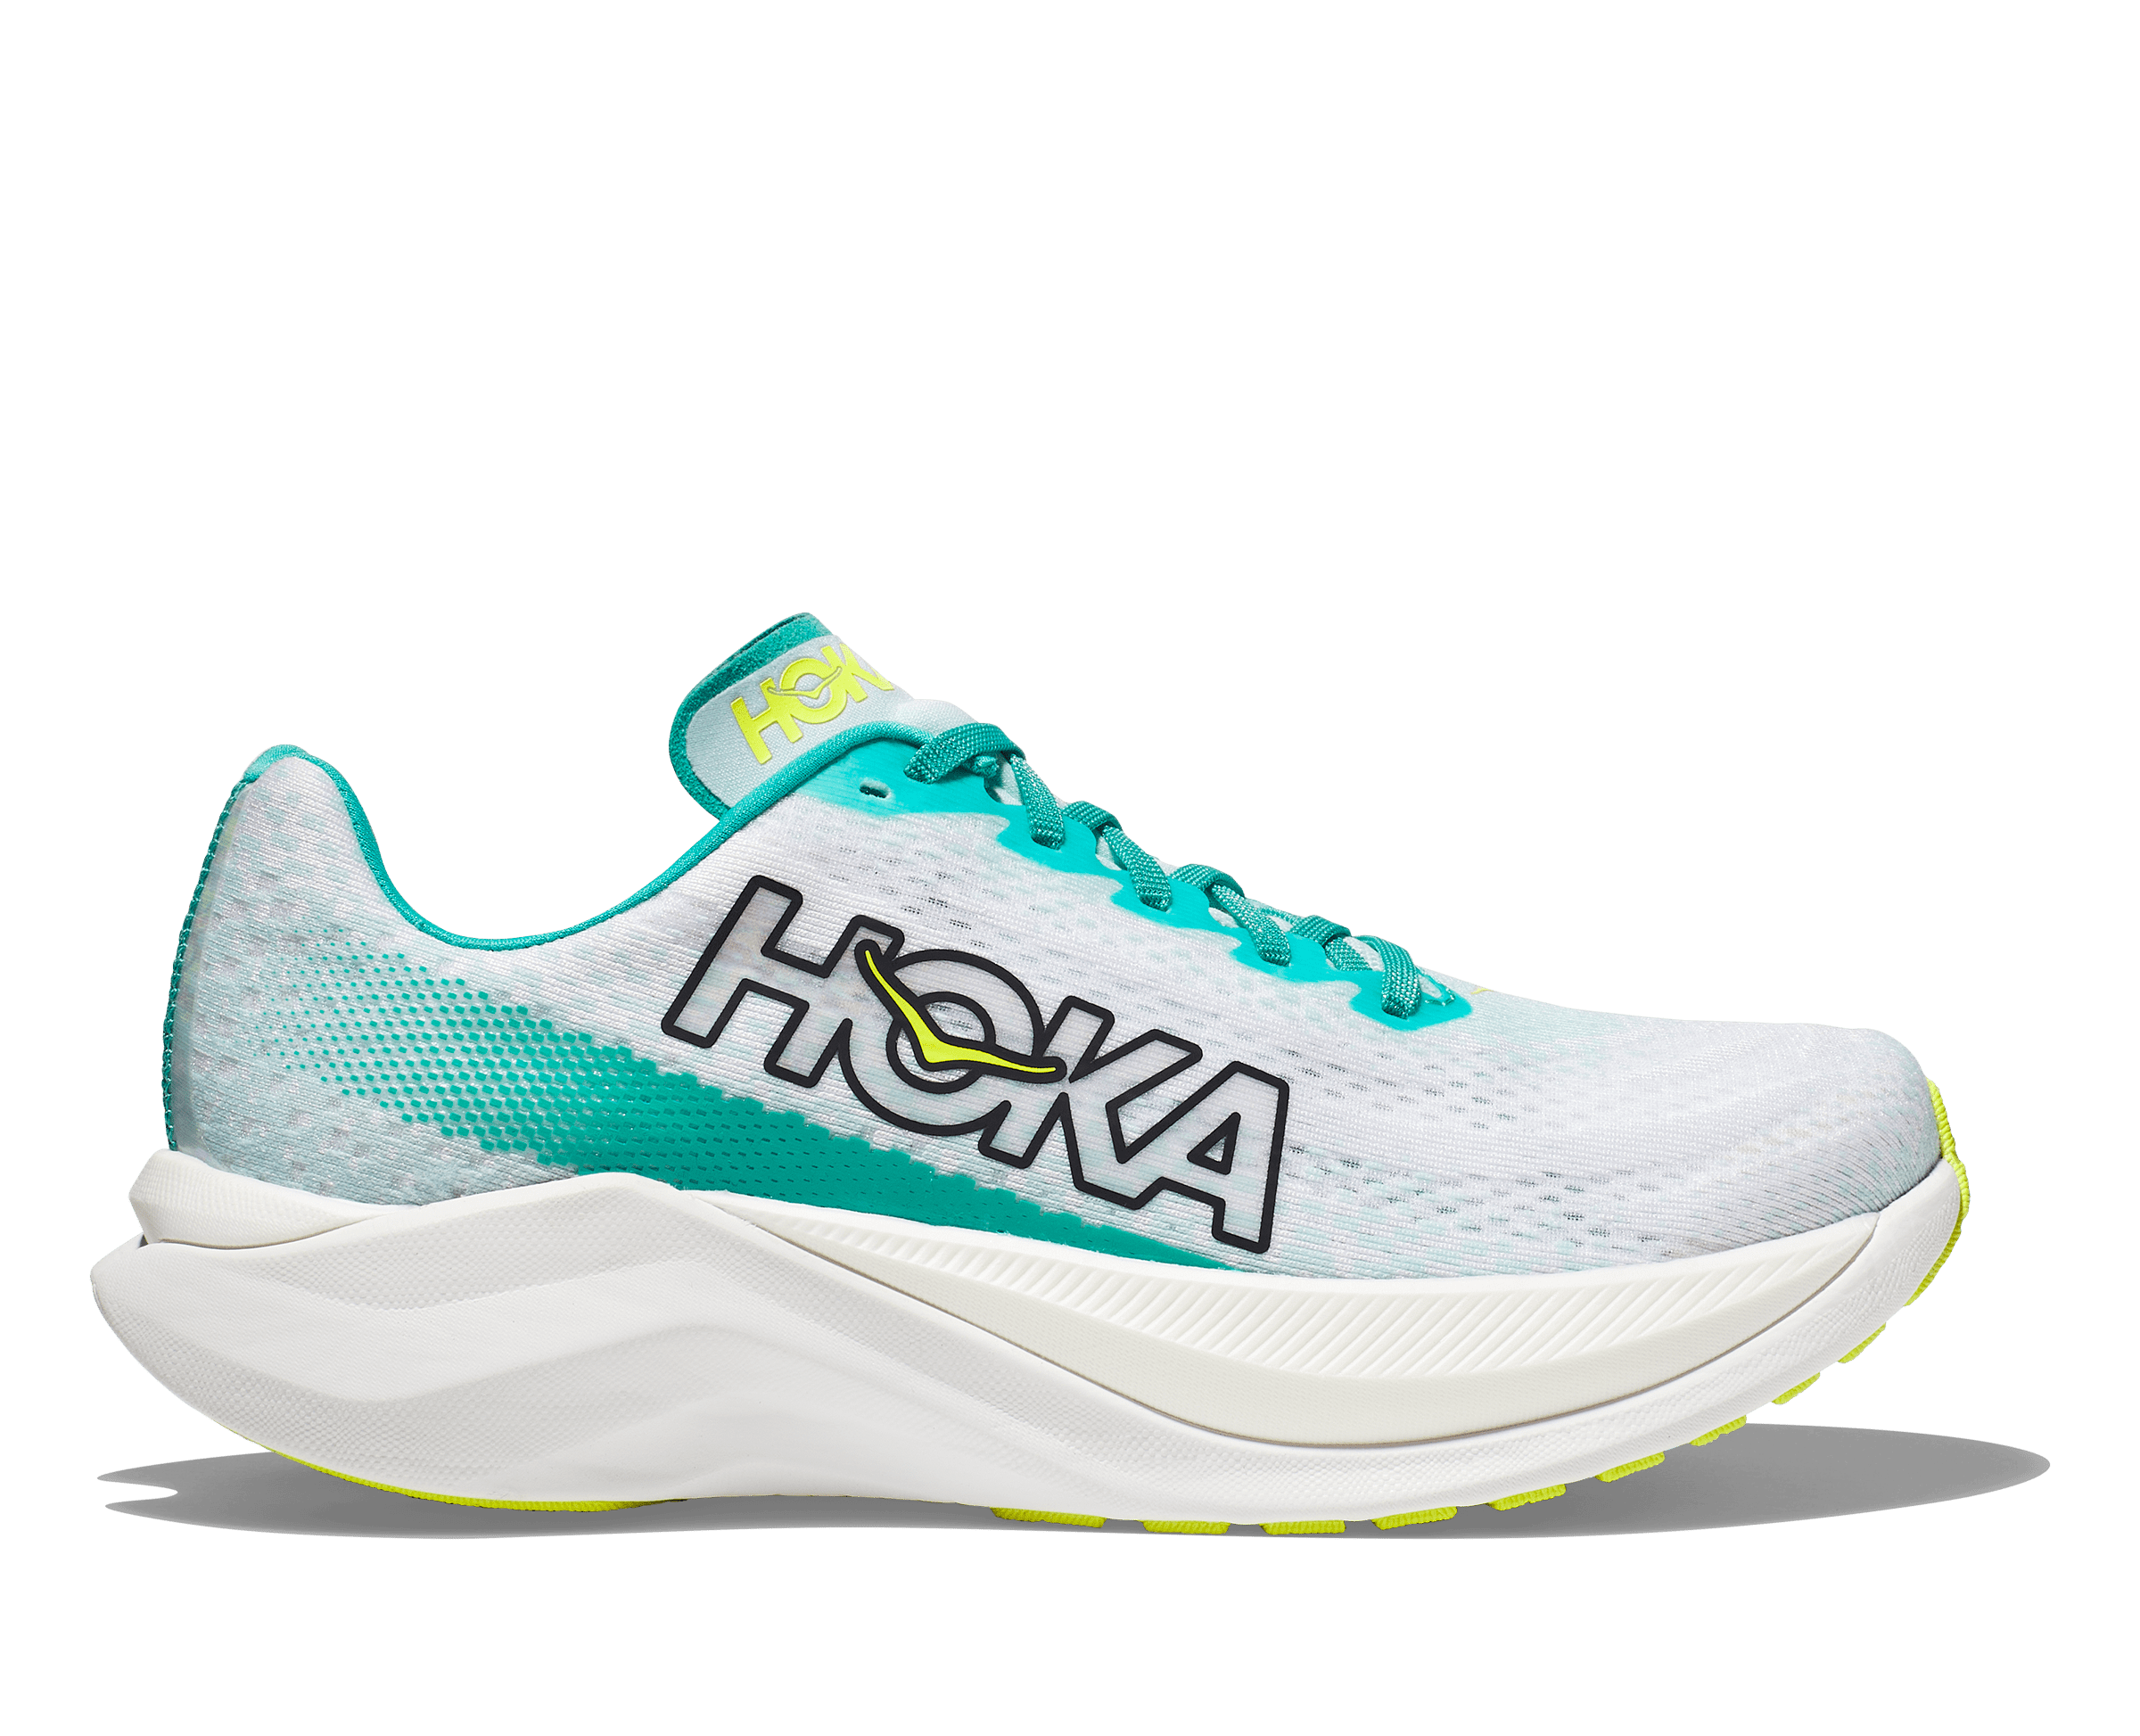 Lateral view of the Men's Mach X from HOKA in the color White/Blue Glass